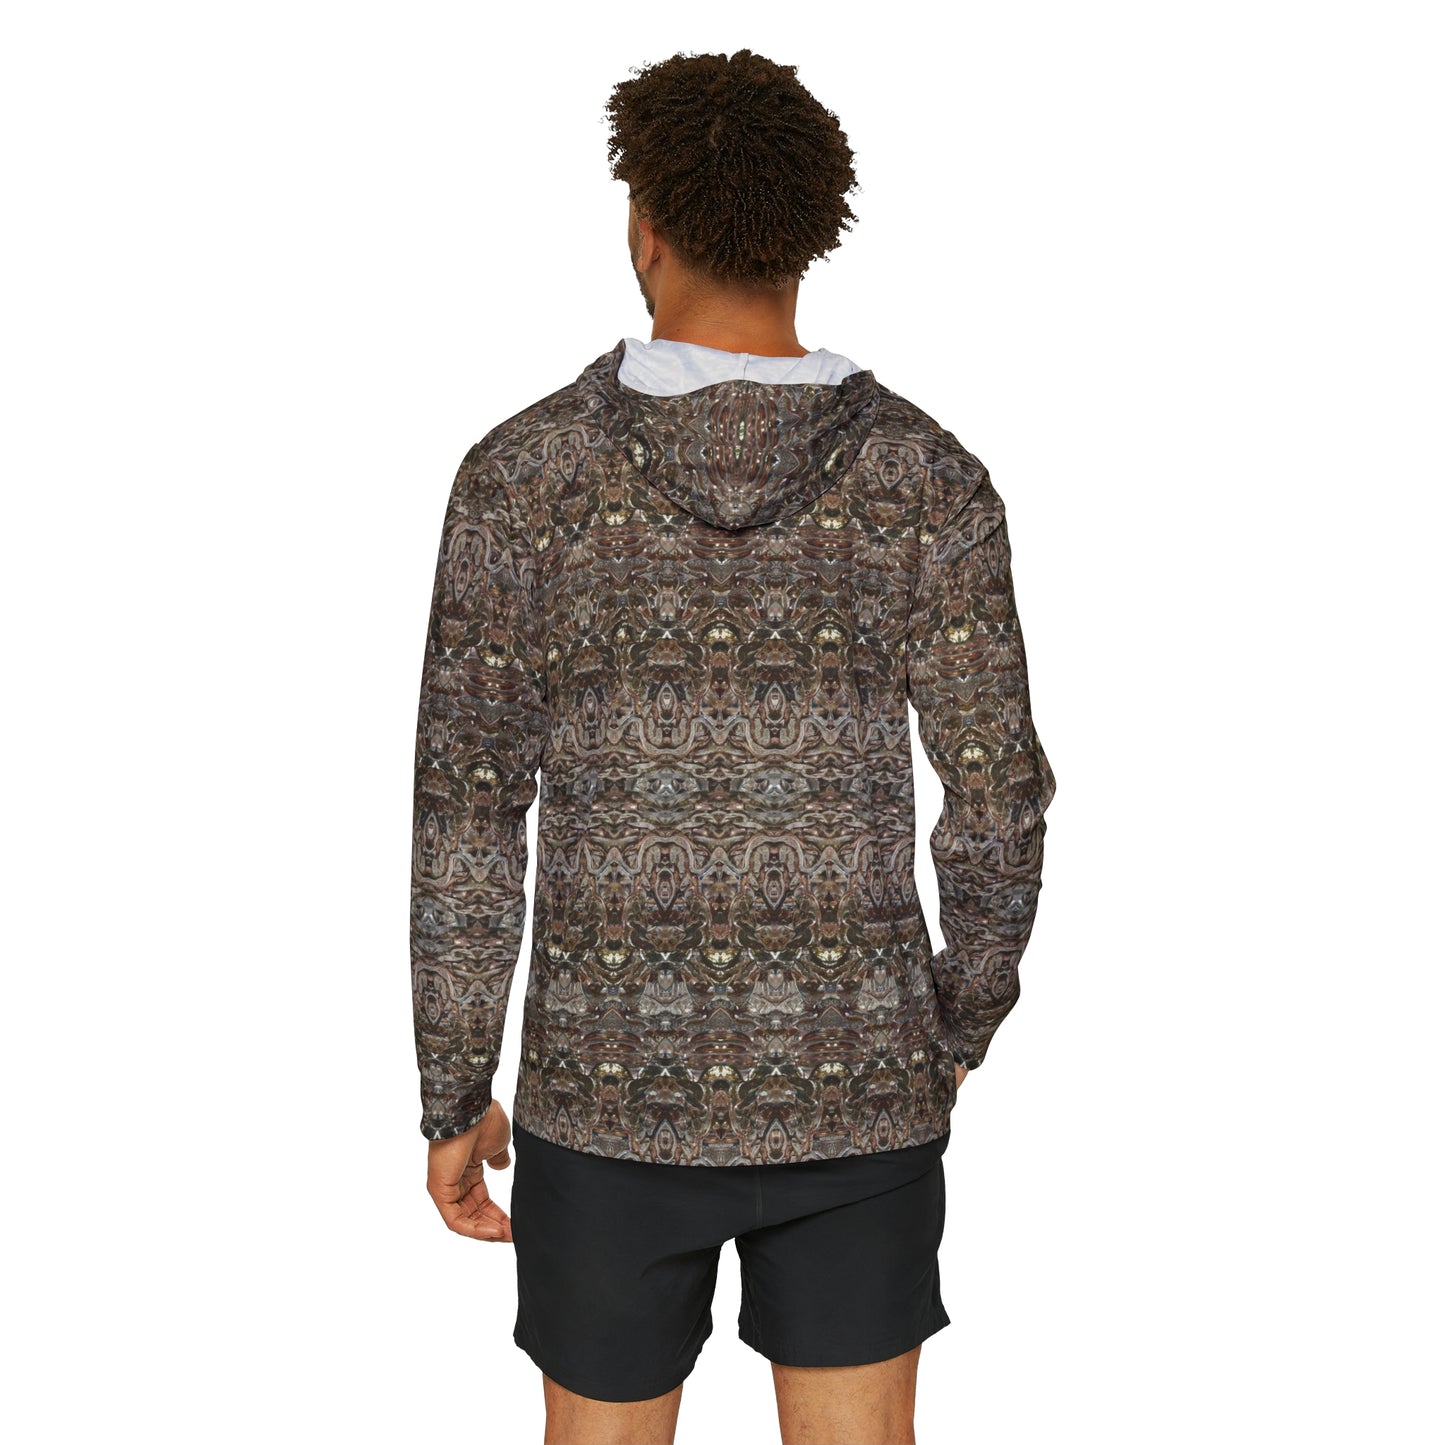 Athletic Activewear Hoodie (His/They)(Samhain Dream Thaw 14 of 15 Quattuordecim ex Quindecim) RJSTH@w2023 RJS